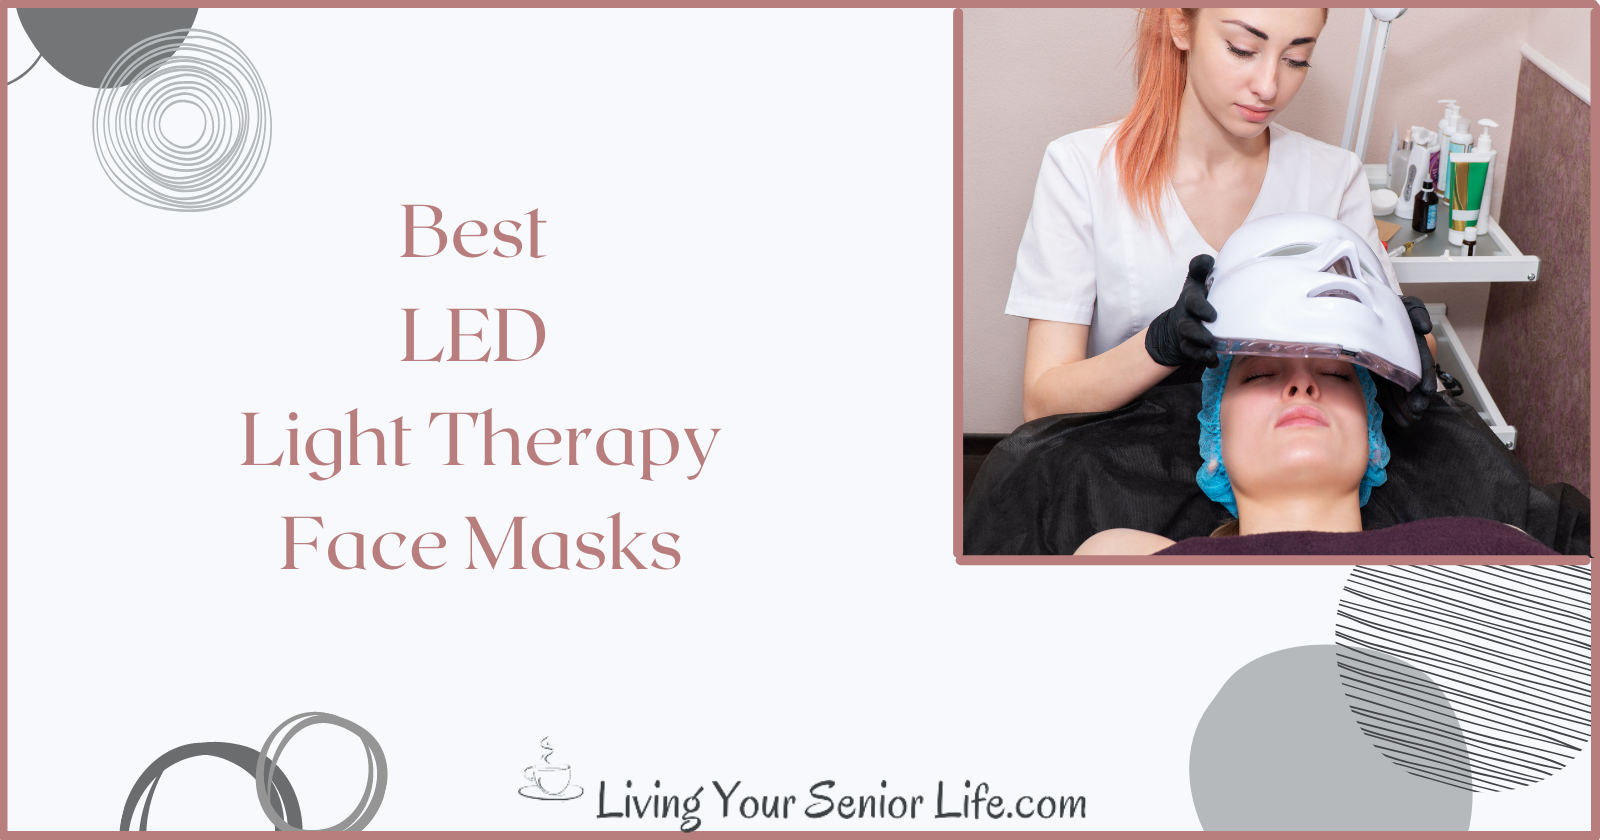 Best LED Light Therapy Face Masks